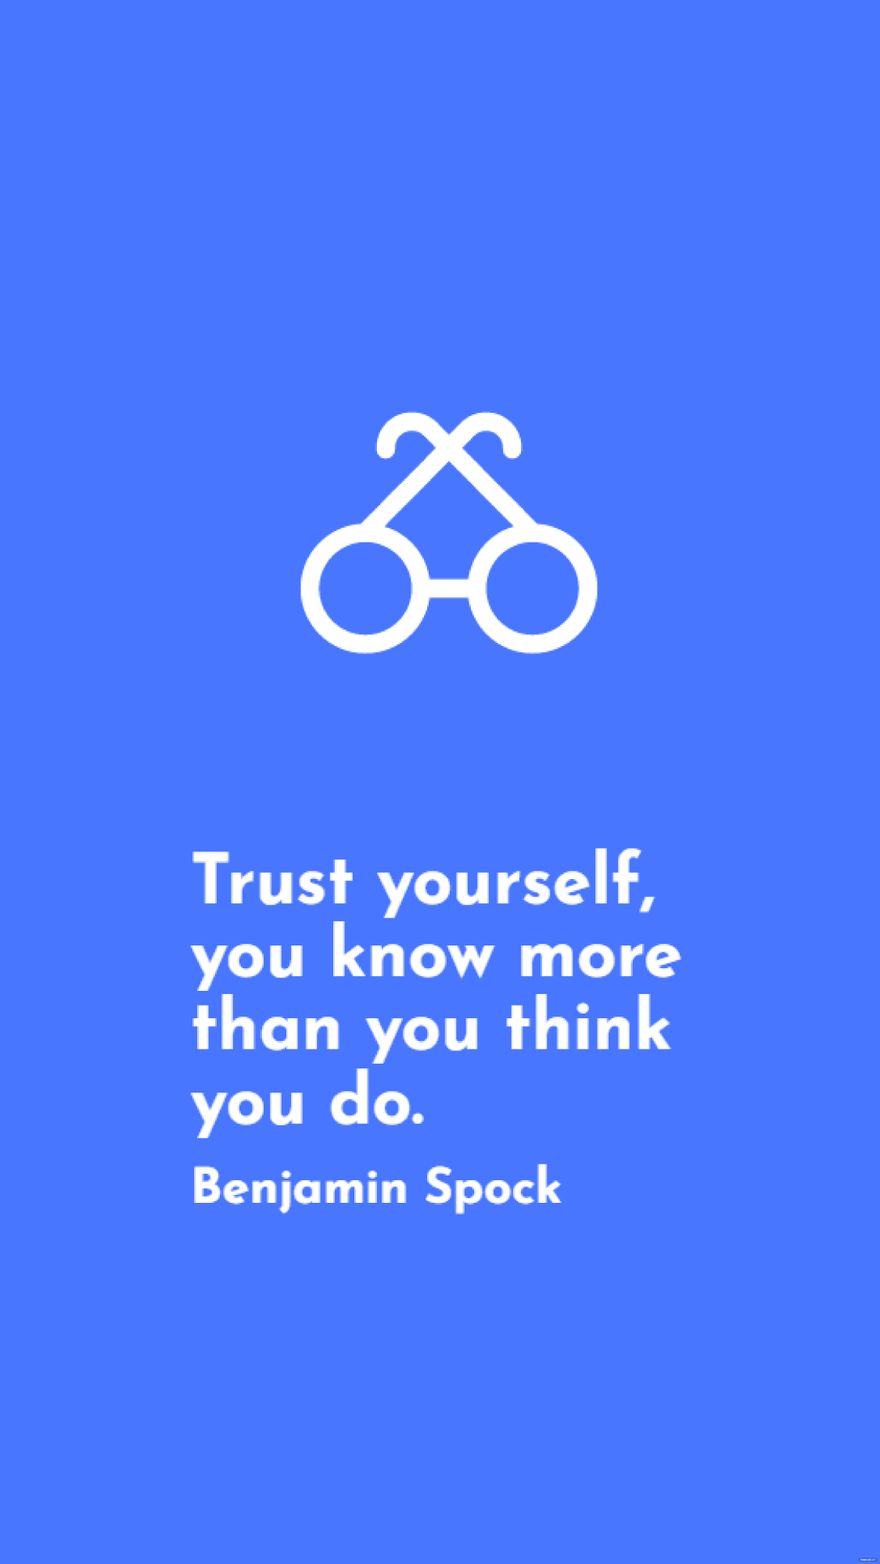 Benjamin Spock - Trust yourself, you know more than you think you do.